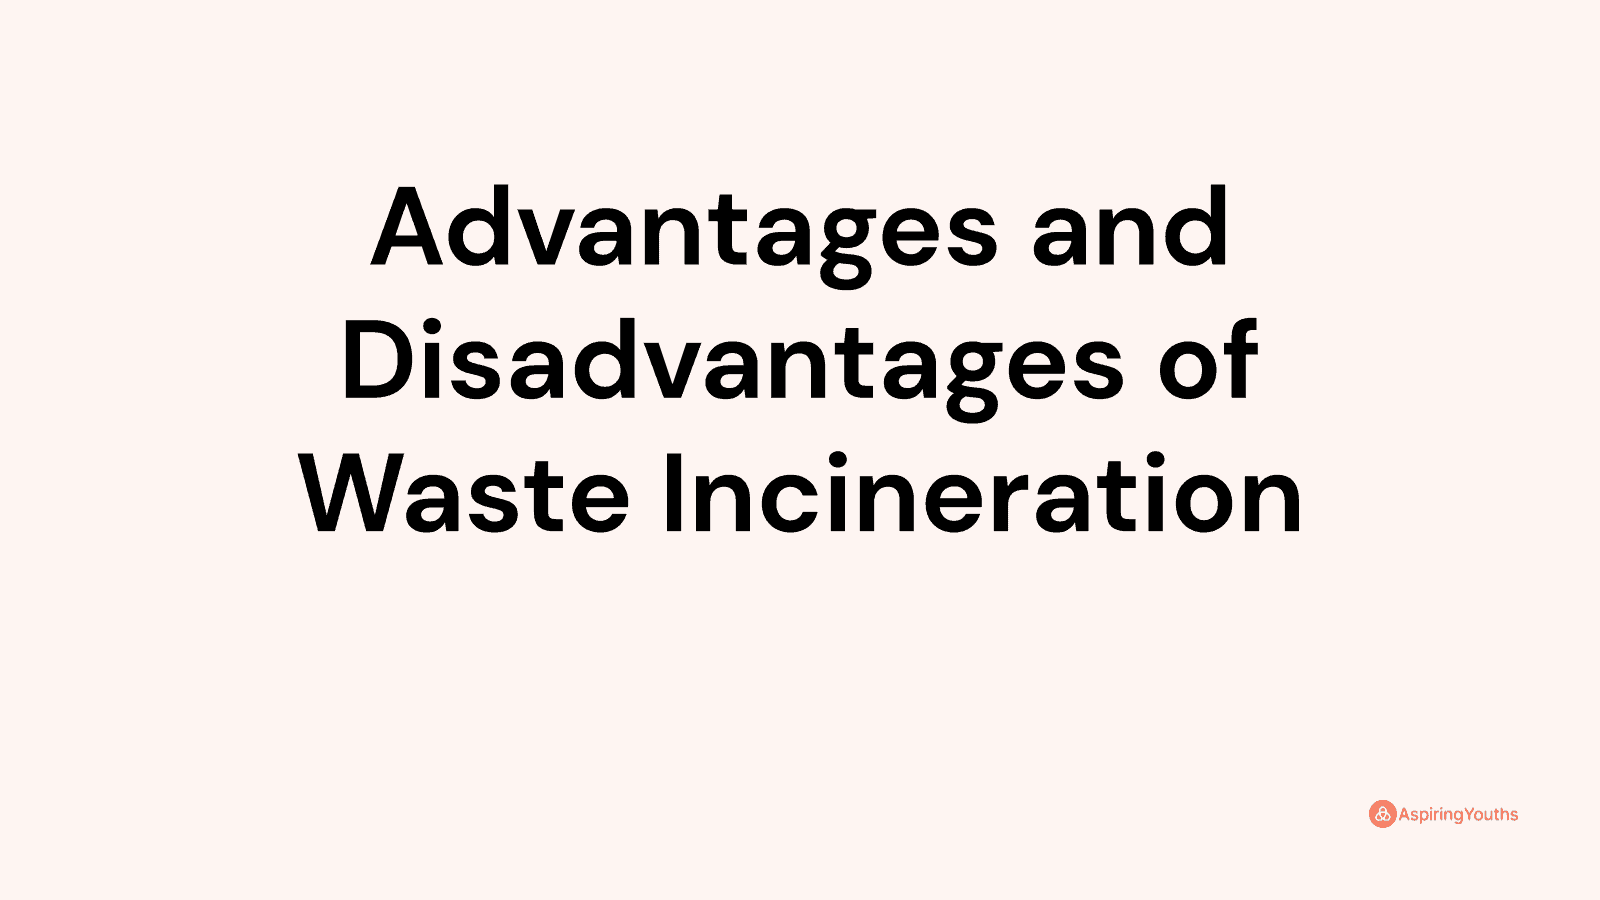 Advantages and disadvantages of Waste Incineration